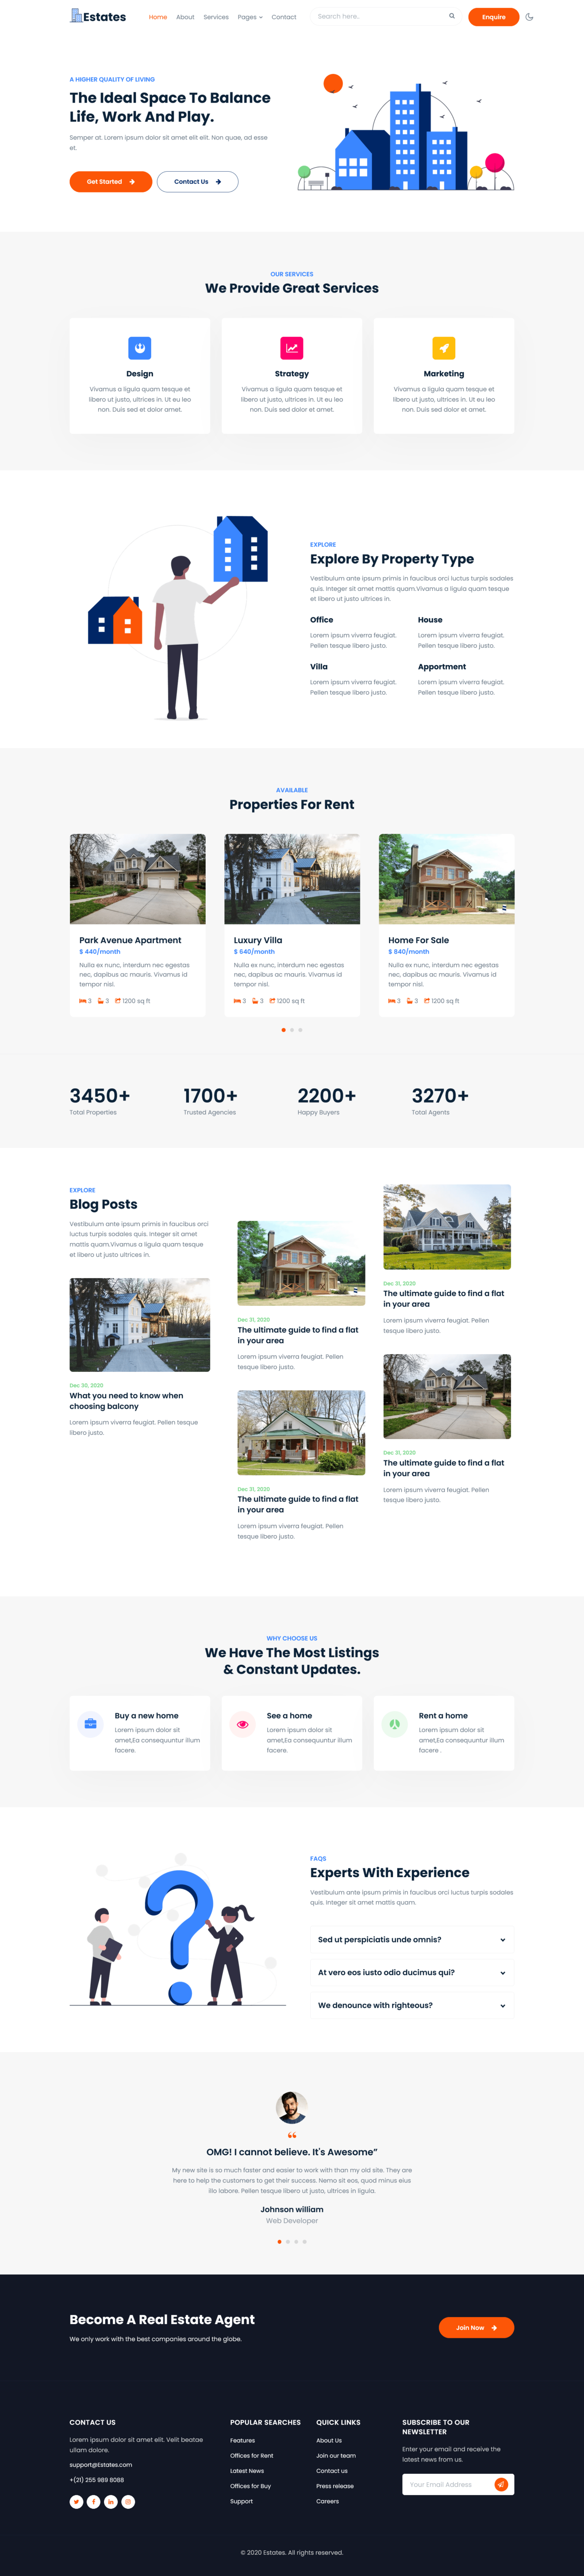 Estates website template - Home Page